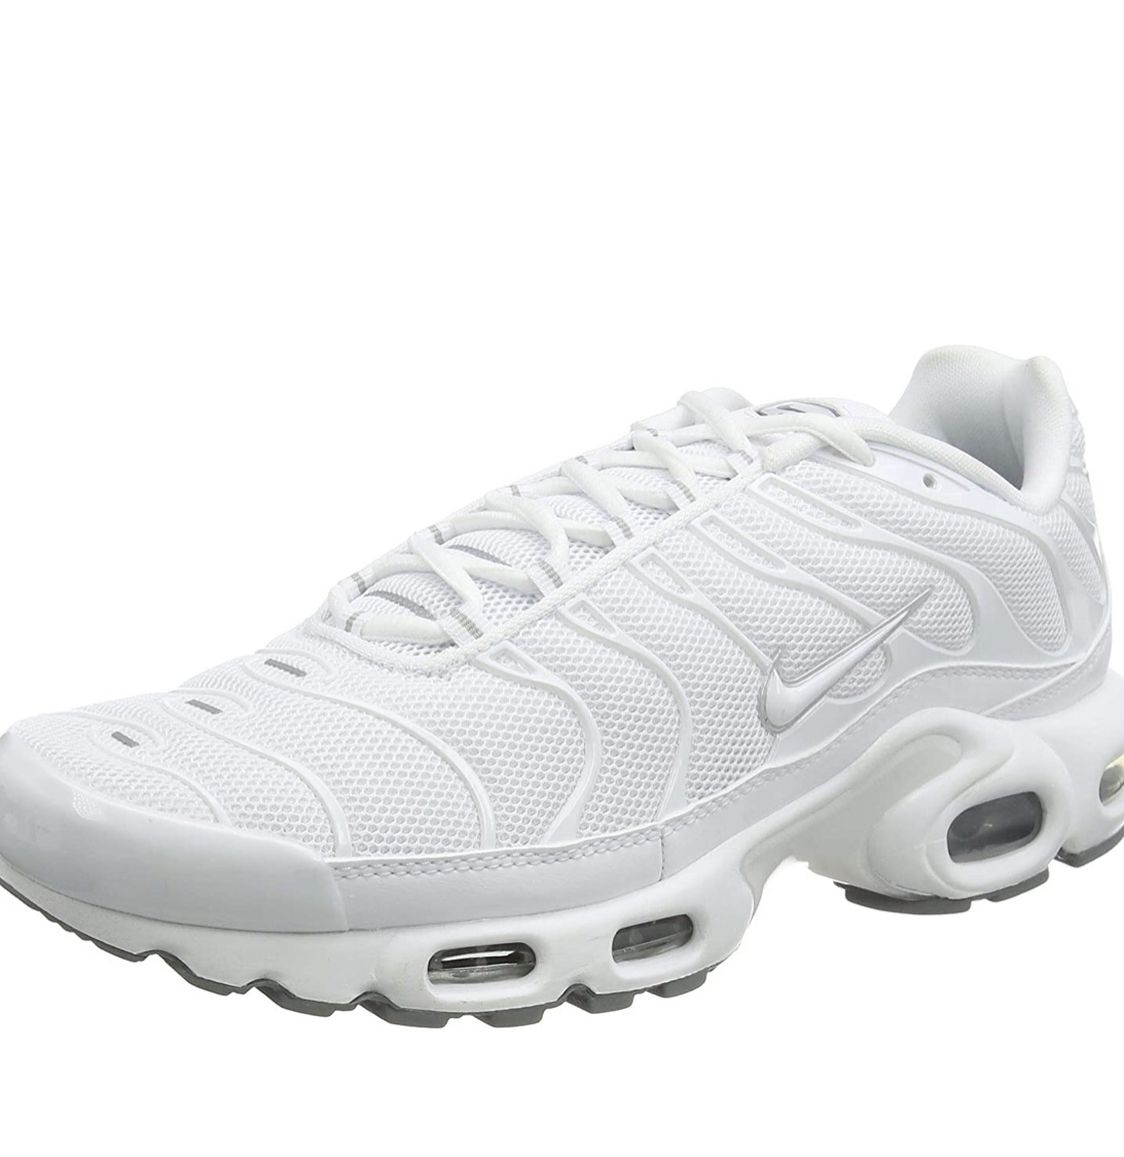 Nike Men's Air Max Plus Running Sneakers Leather Triple White Size 11 Preowned. Condition is "Pre-owned". Well loved Preowned. Please see all photos